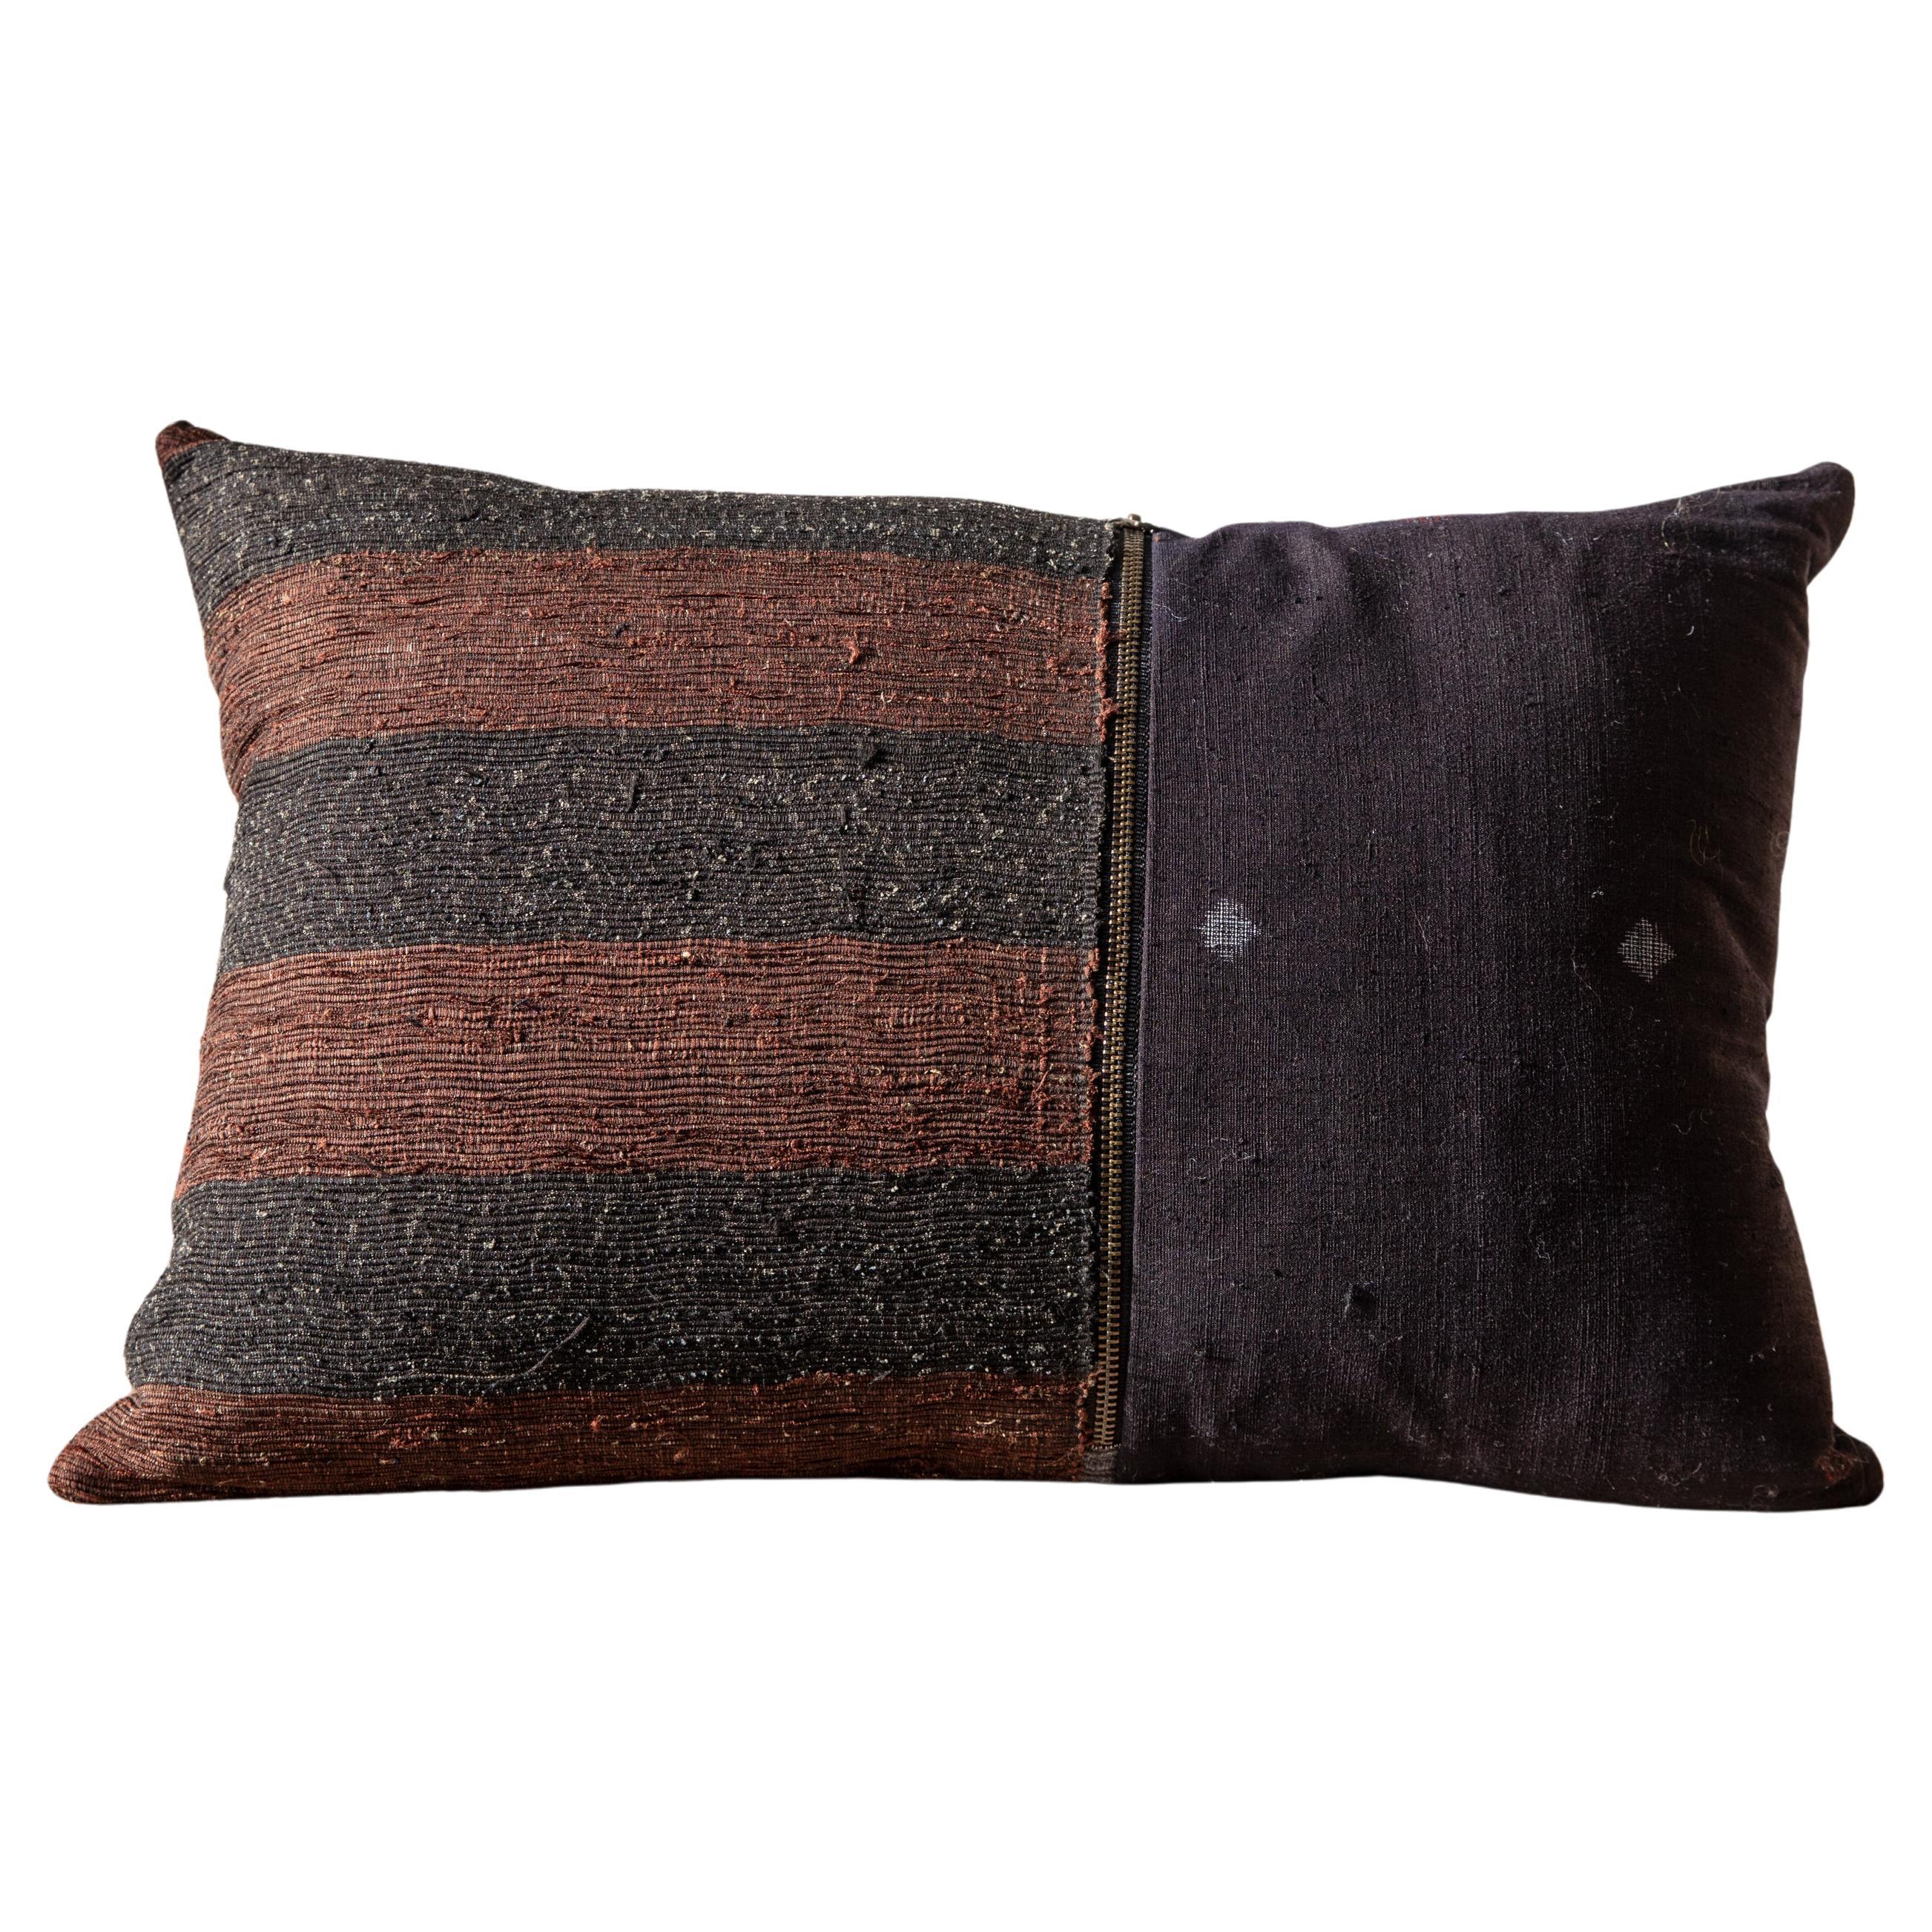 Housewright Gallery Pillows